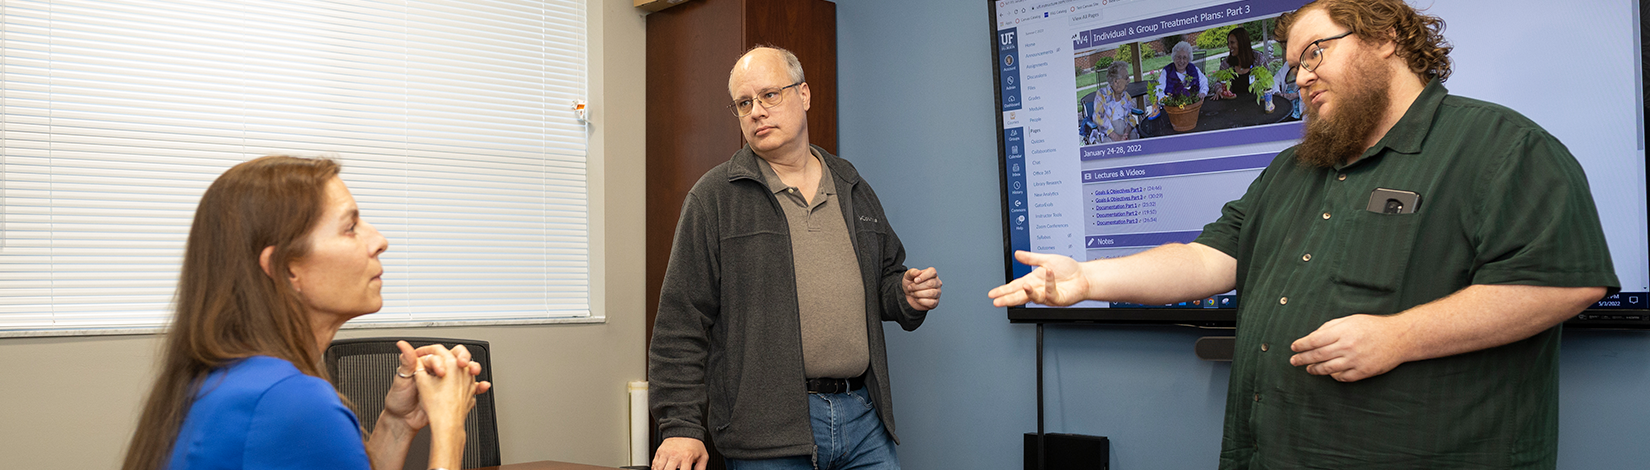 Two faculty members standing next to a screen give a presentation to a student sitting at a table.